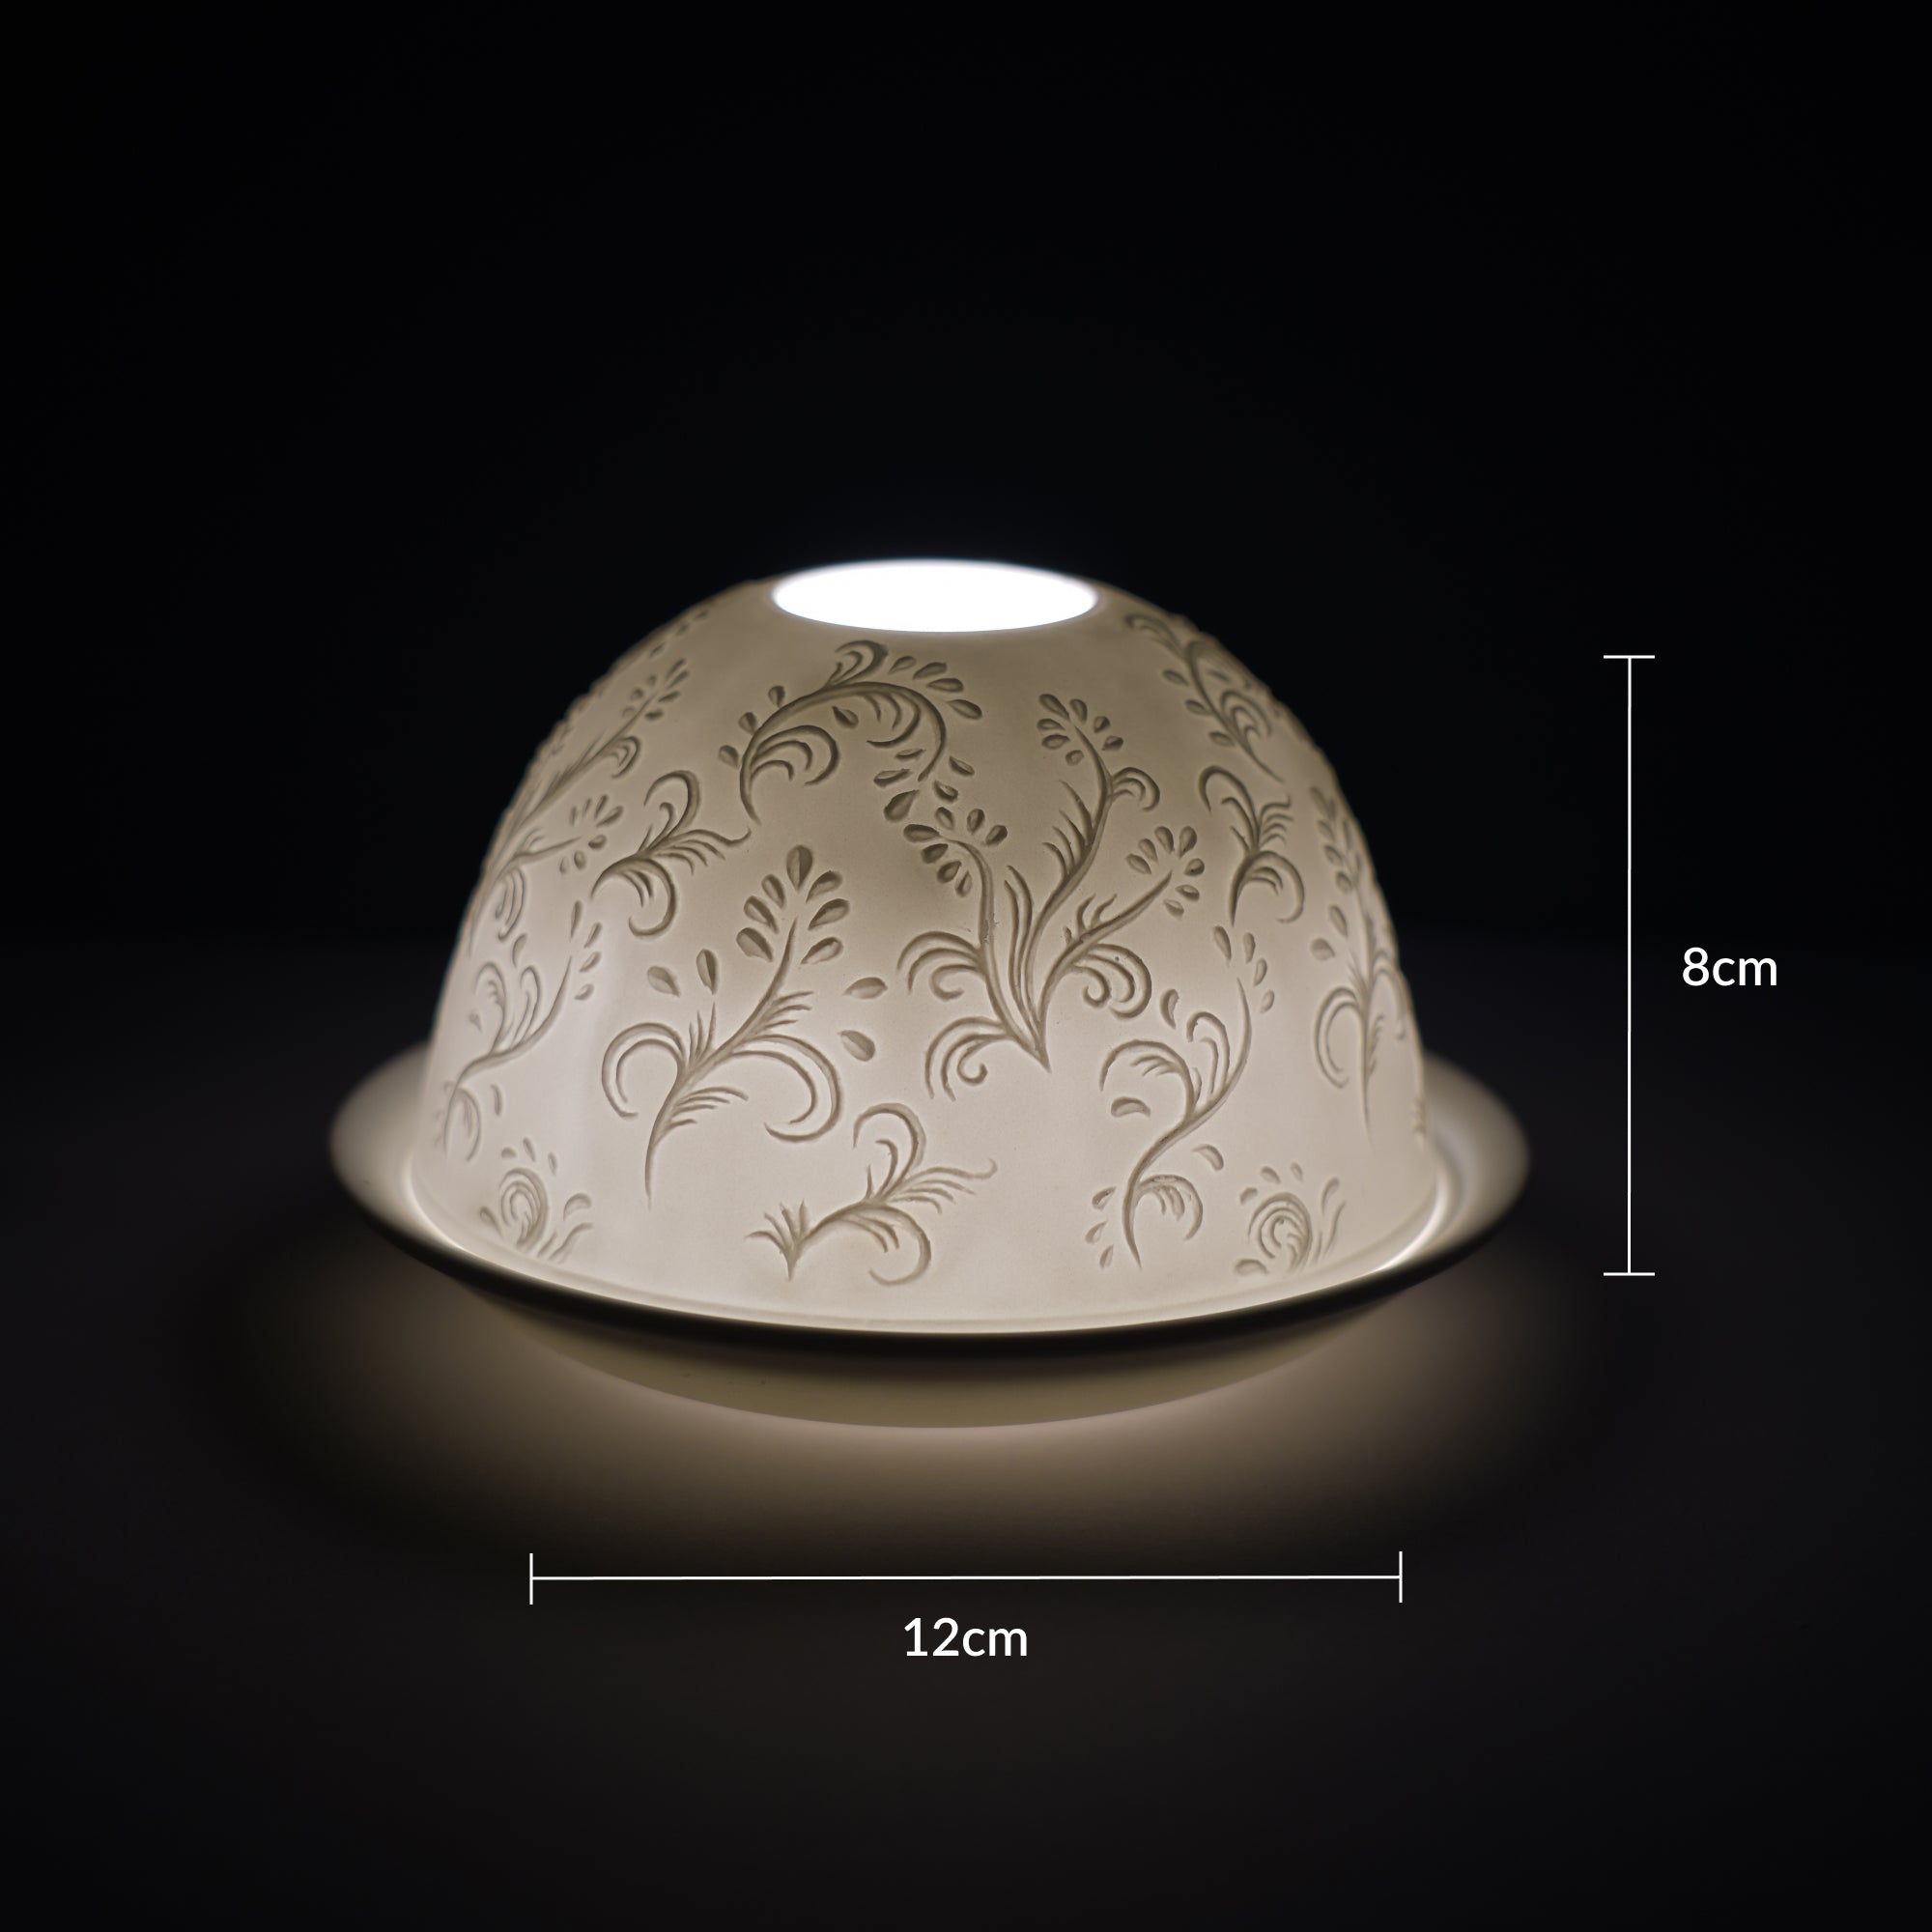 Cello - Tealight Dome - Patterned